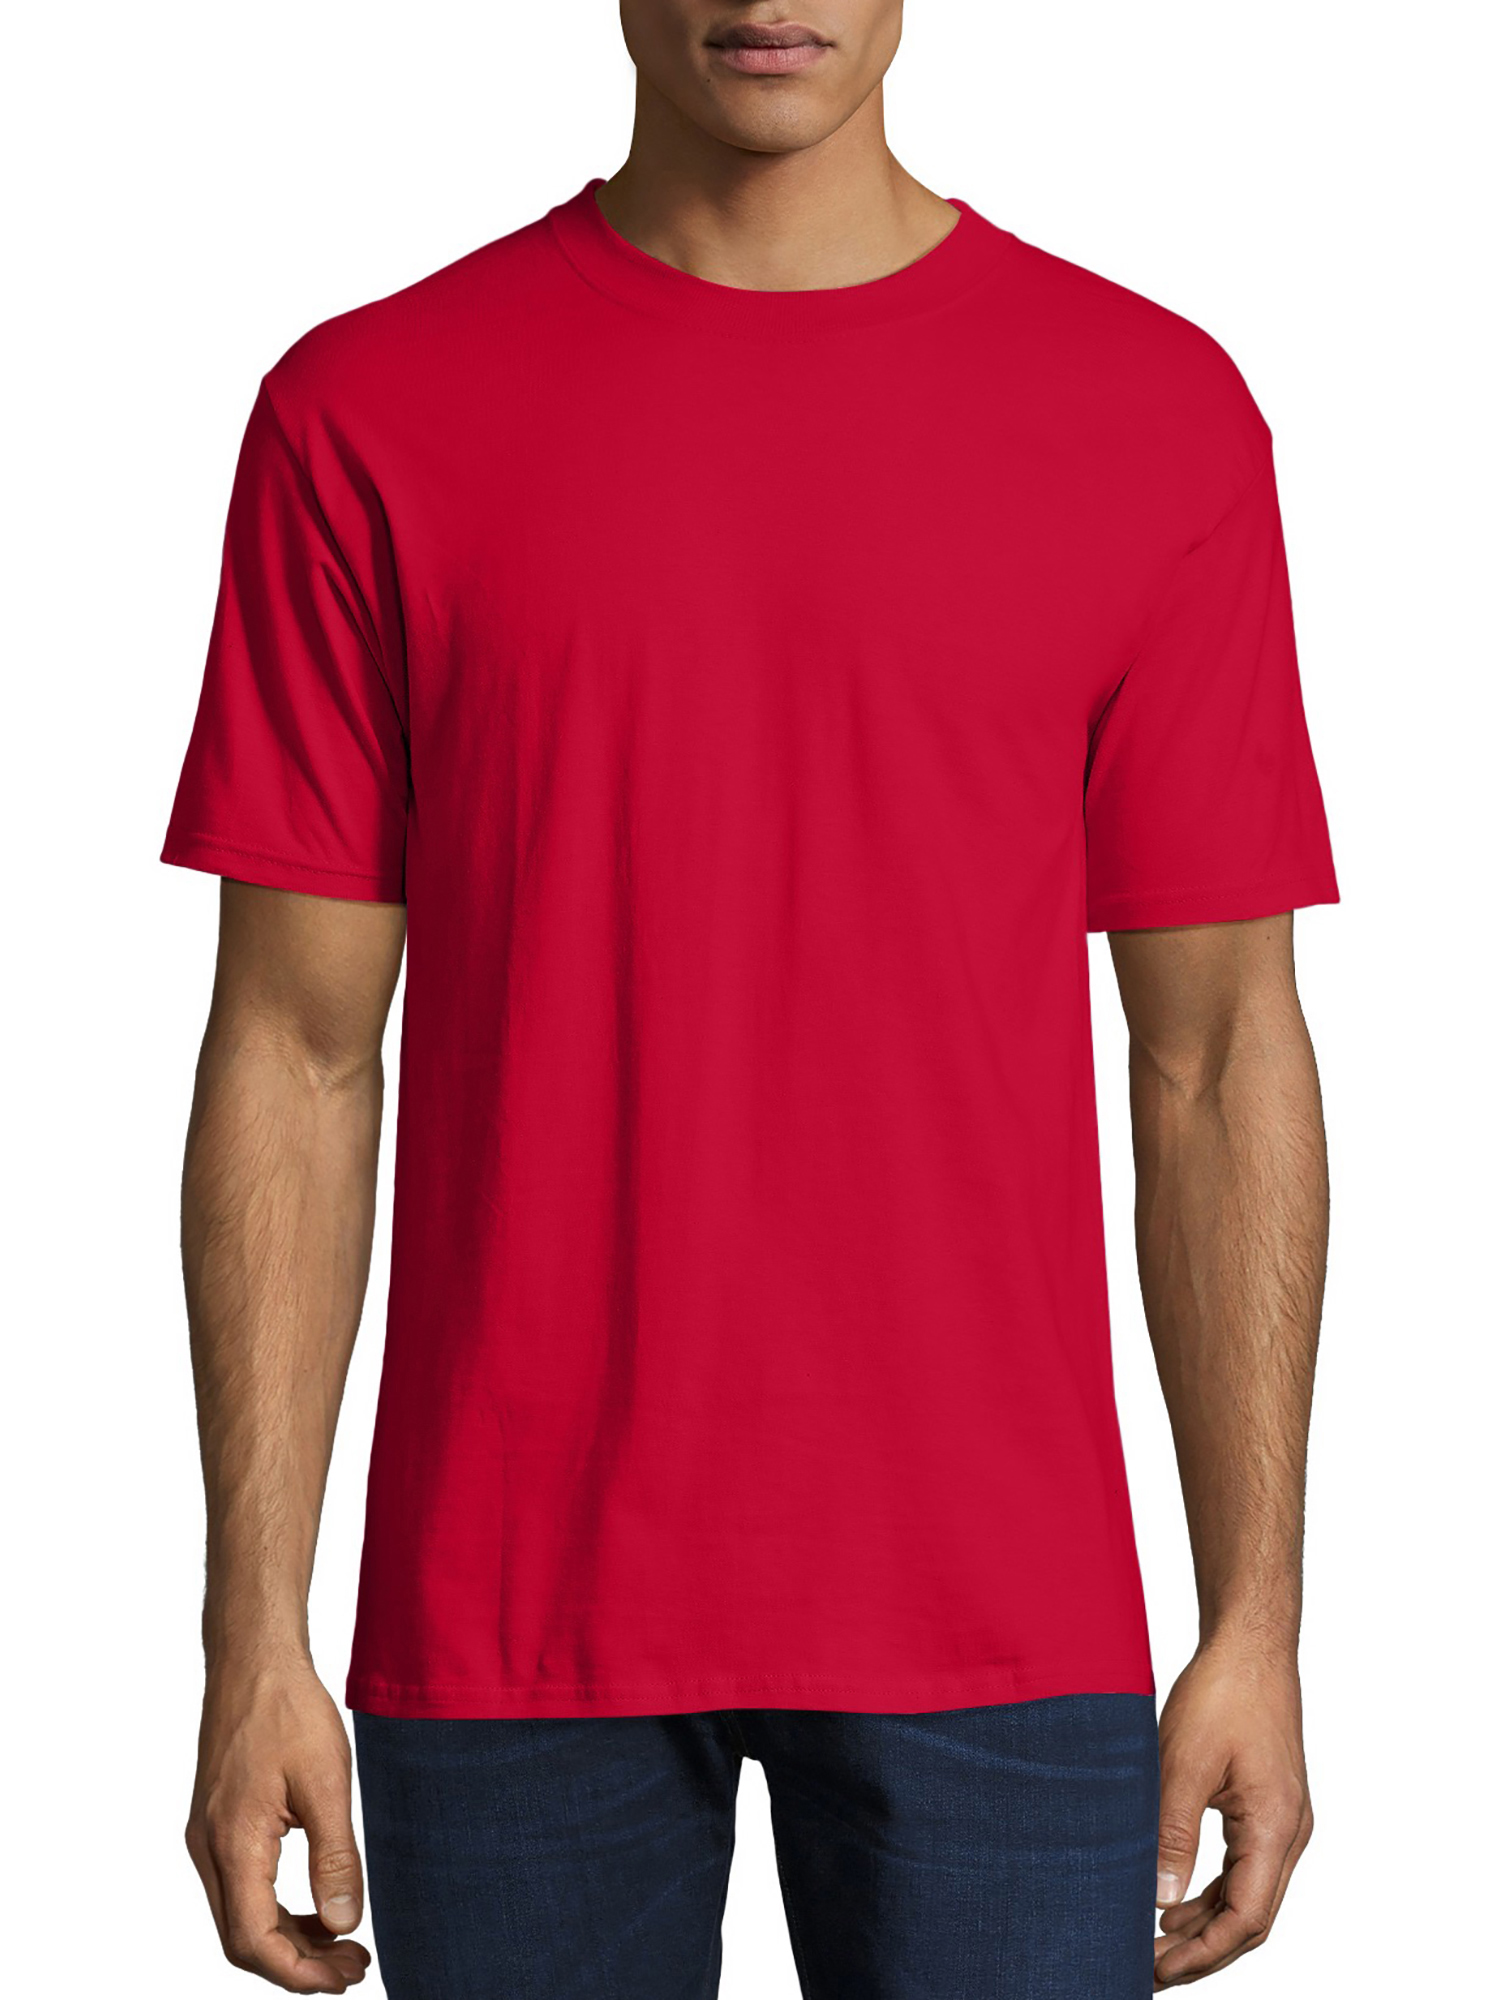 Hanes Big Men's Beefy Heavyweight Short Sleeve T-shirt - Tall Sizes, Up To Size 4XT - image 1 of 7